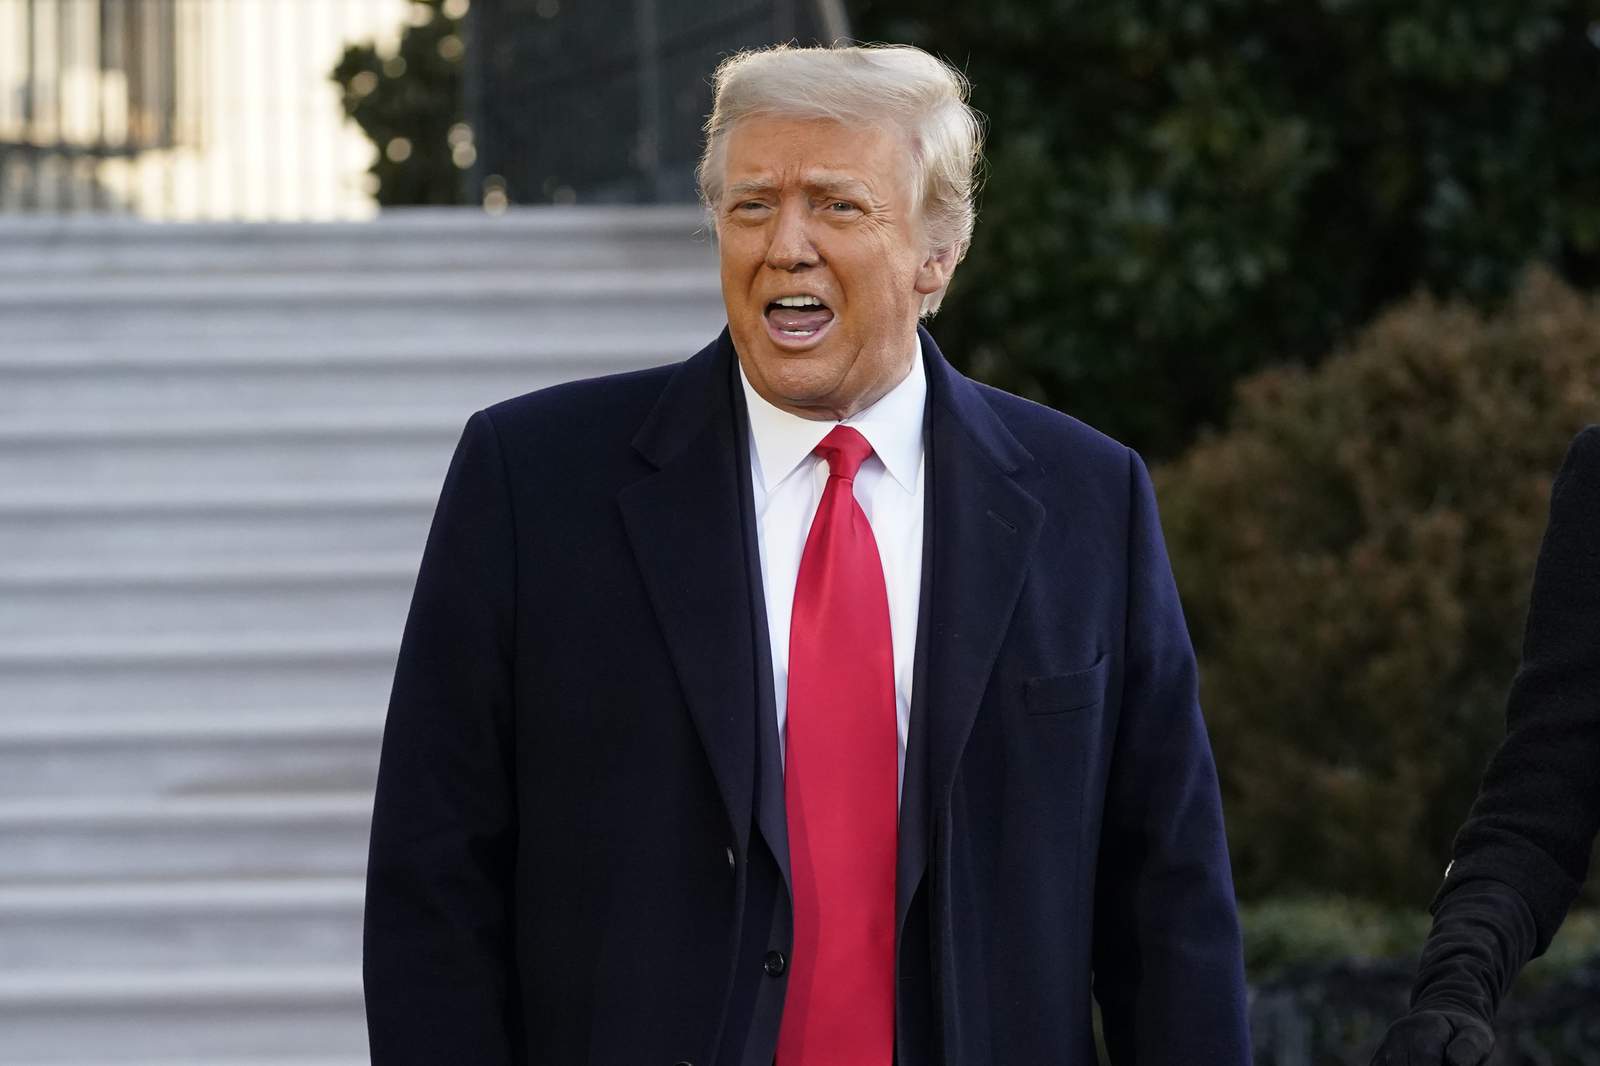 Nightside Report Feb. 13, 2021: Trump acquitted in historic impeachment trial; Michigan Dems contend Trump is responsible, but are ready to move on